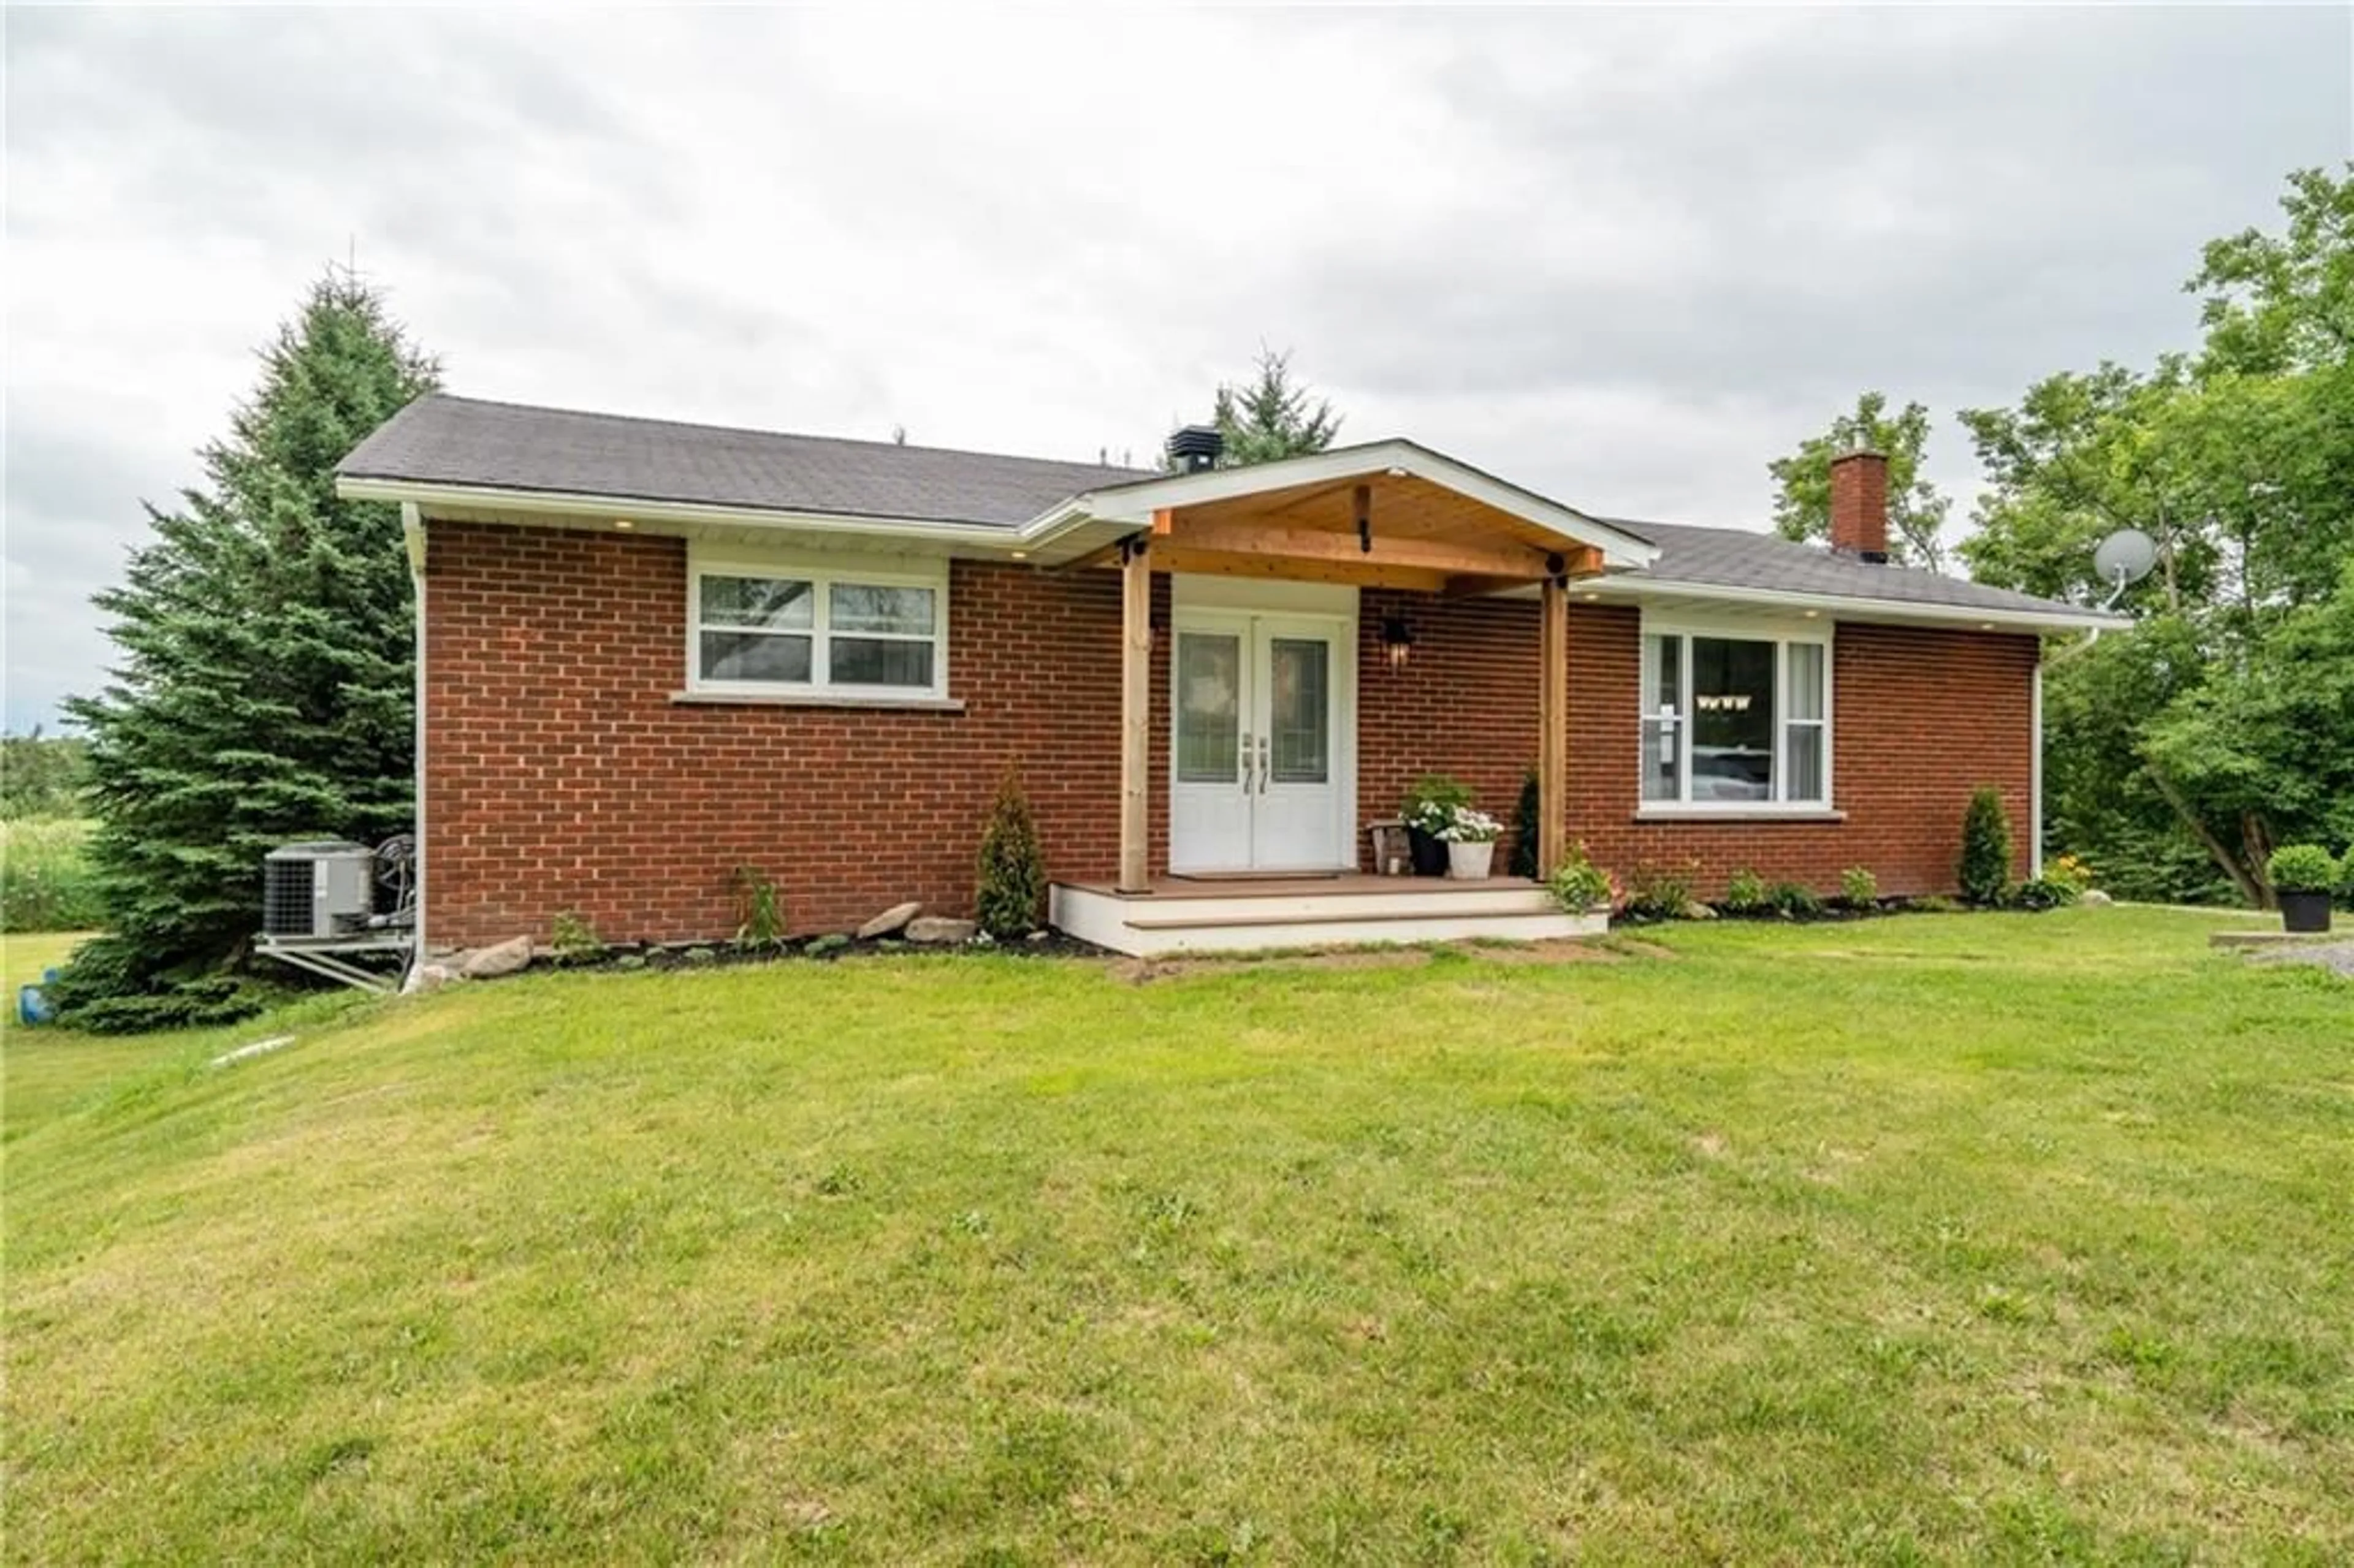 Home with brick exterior material for 20362 CONCESSION 8 Rd, Green Valley Ontario K0C 1L0